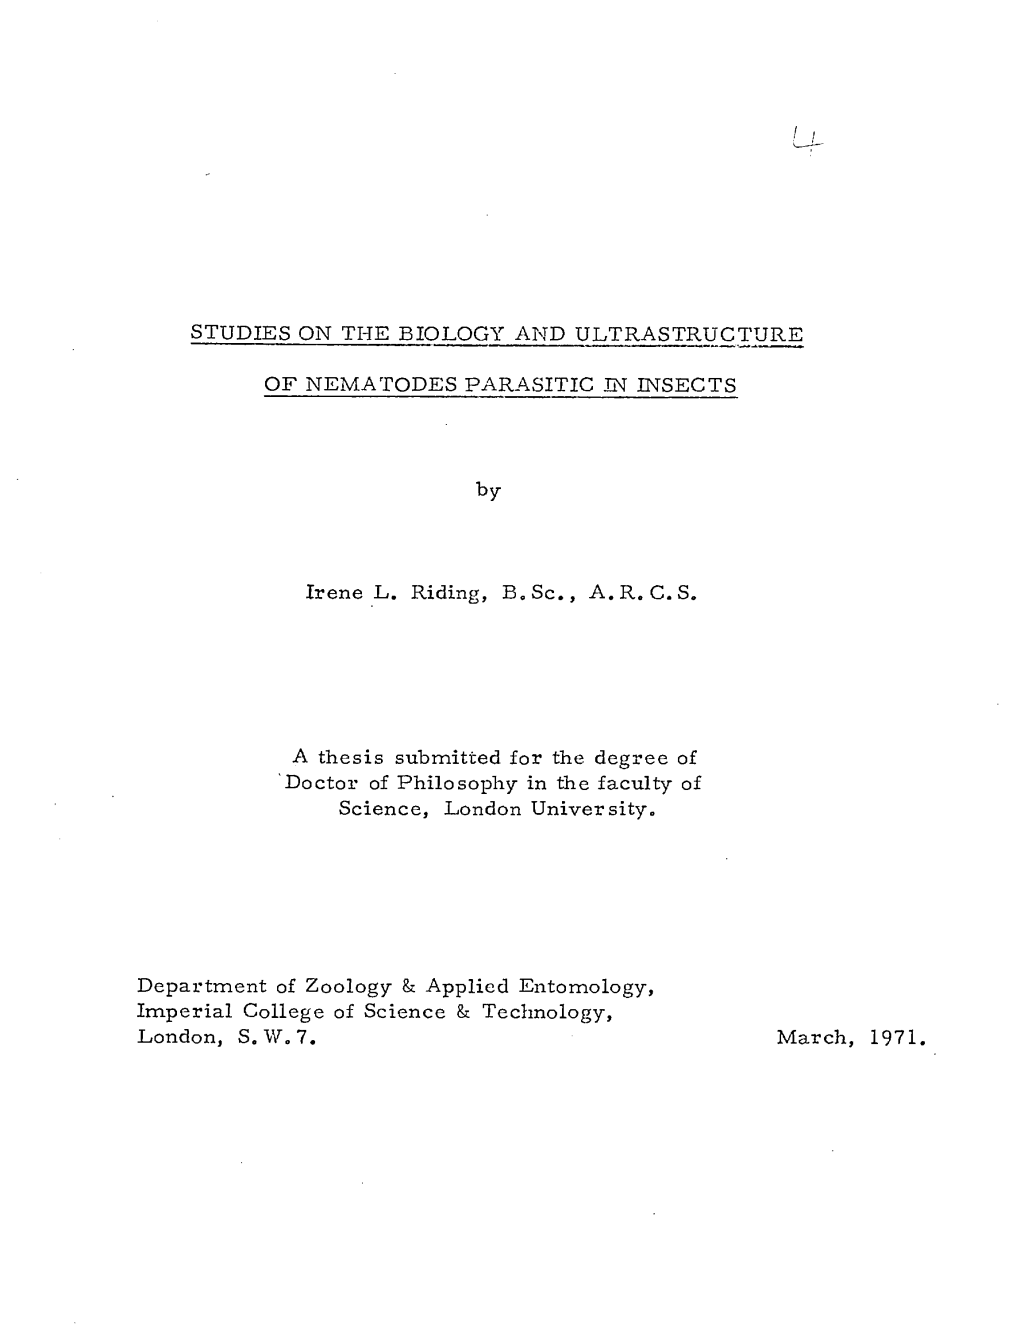 Studies on the Biology and Ultrastructure Of